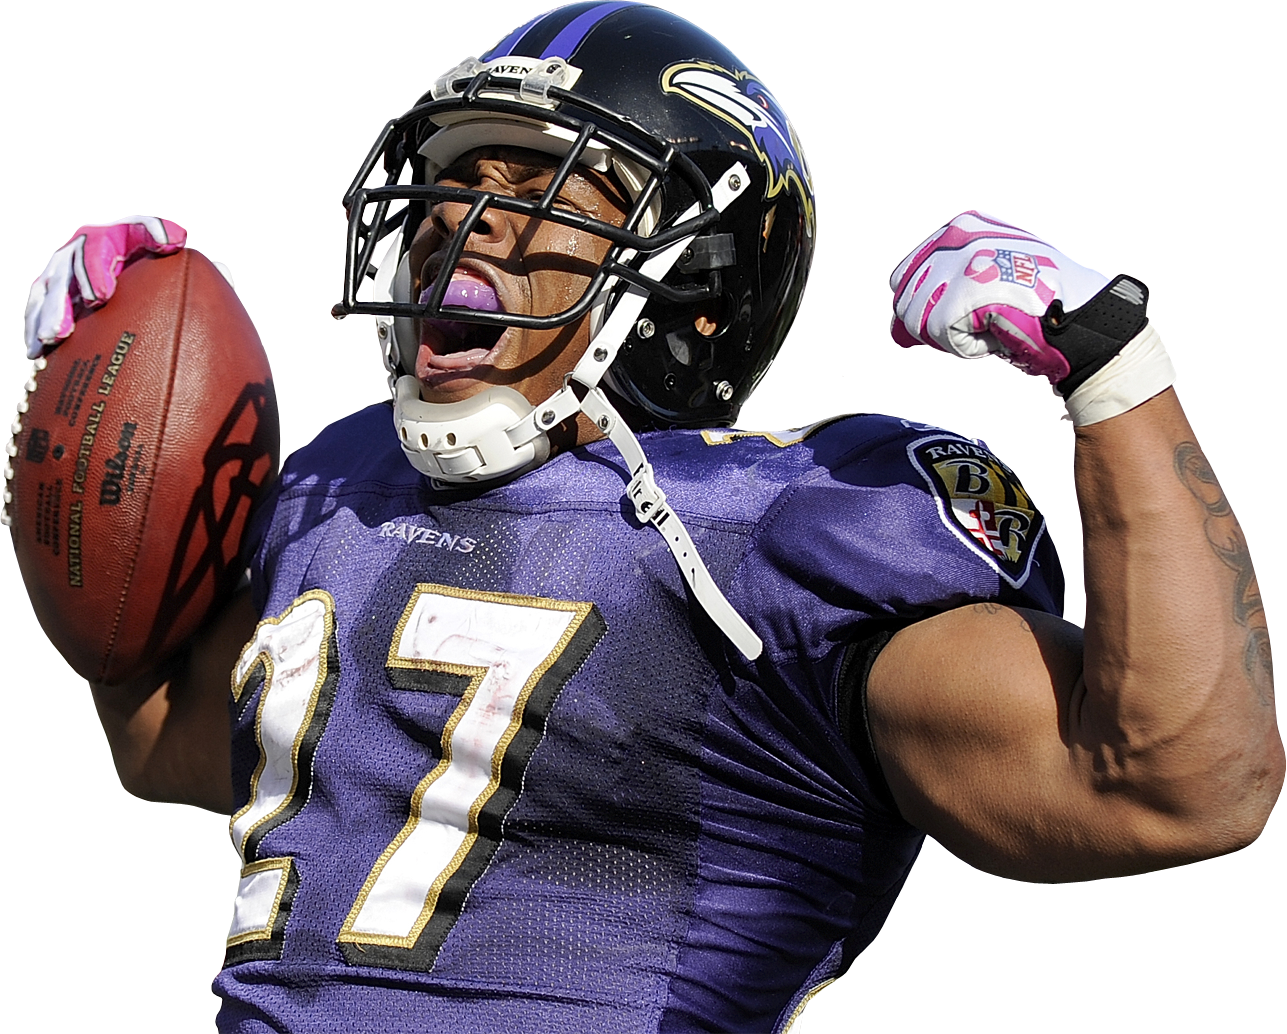 Home Entertainment Video Killed The Nfl Star. Ray_Rice - National Football League, Transparent background PNG HD thumbnail